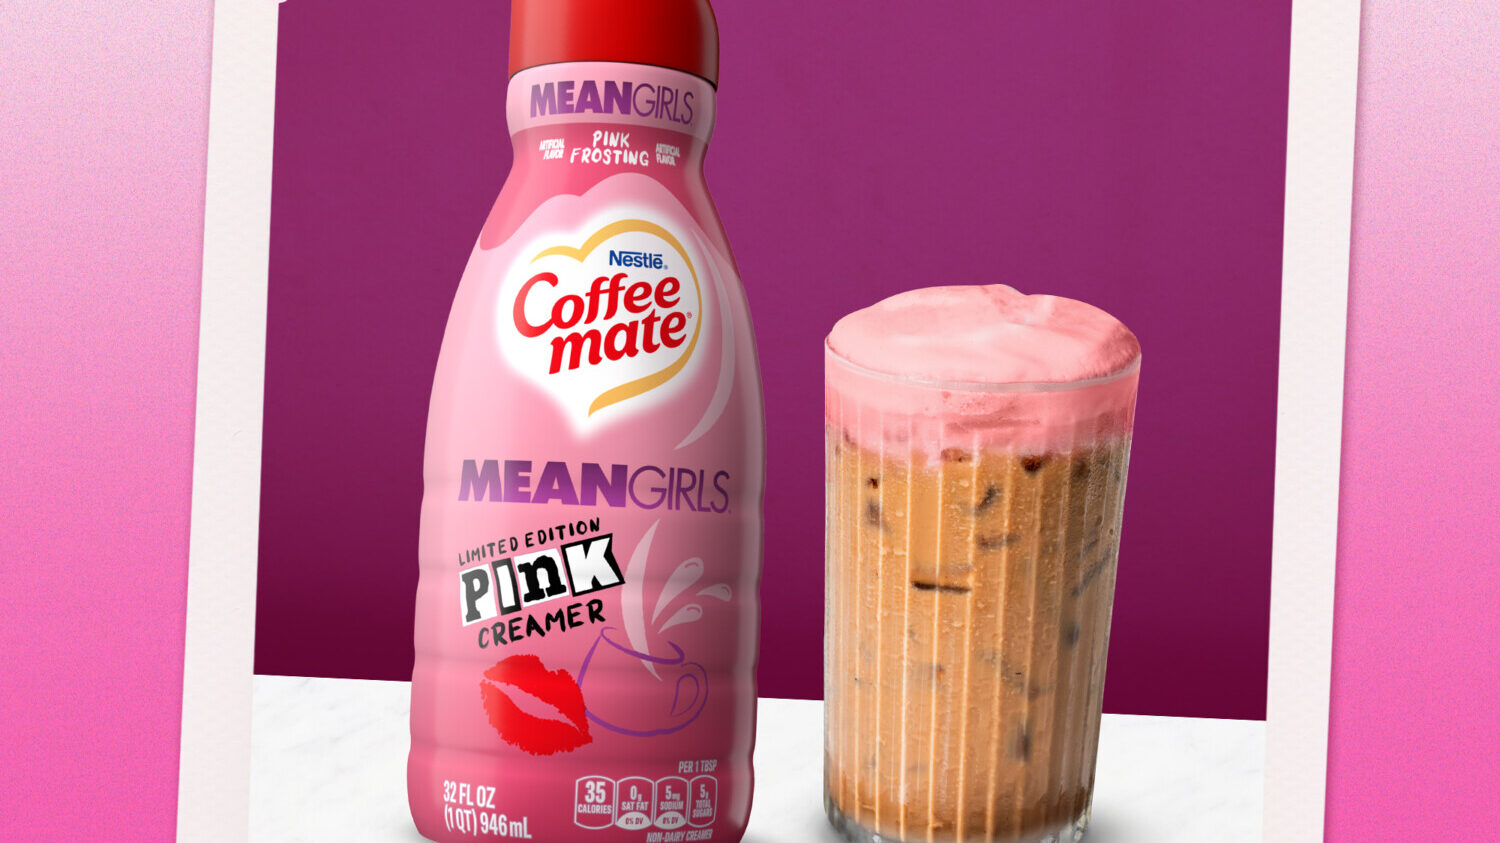 Coffee mate's 'Mean Girls' creamer on pink background